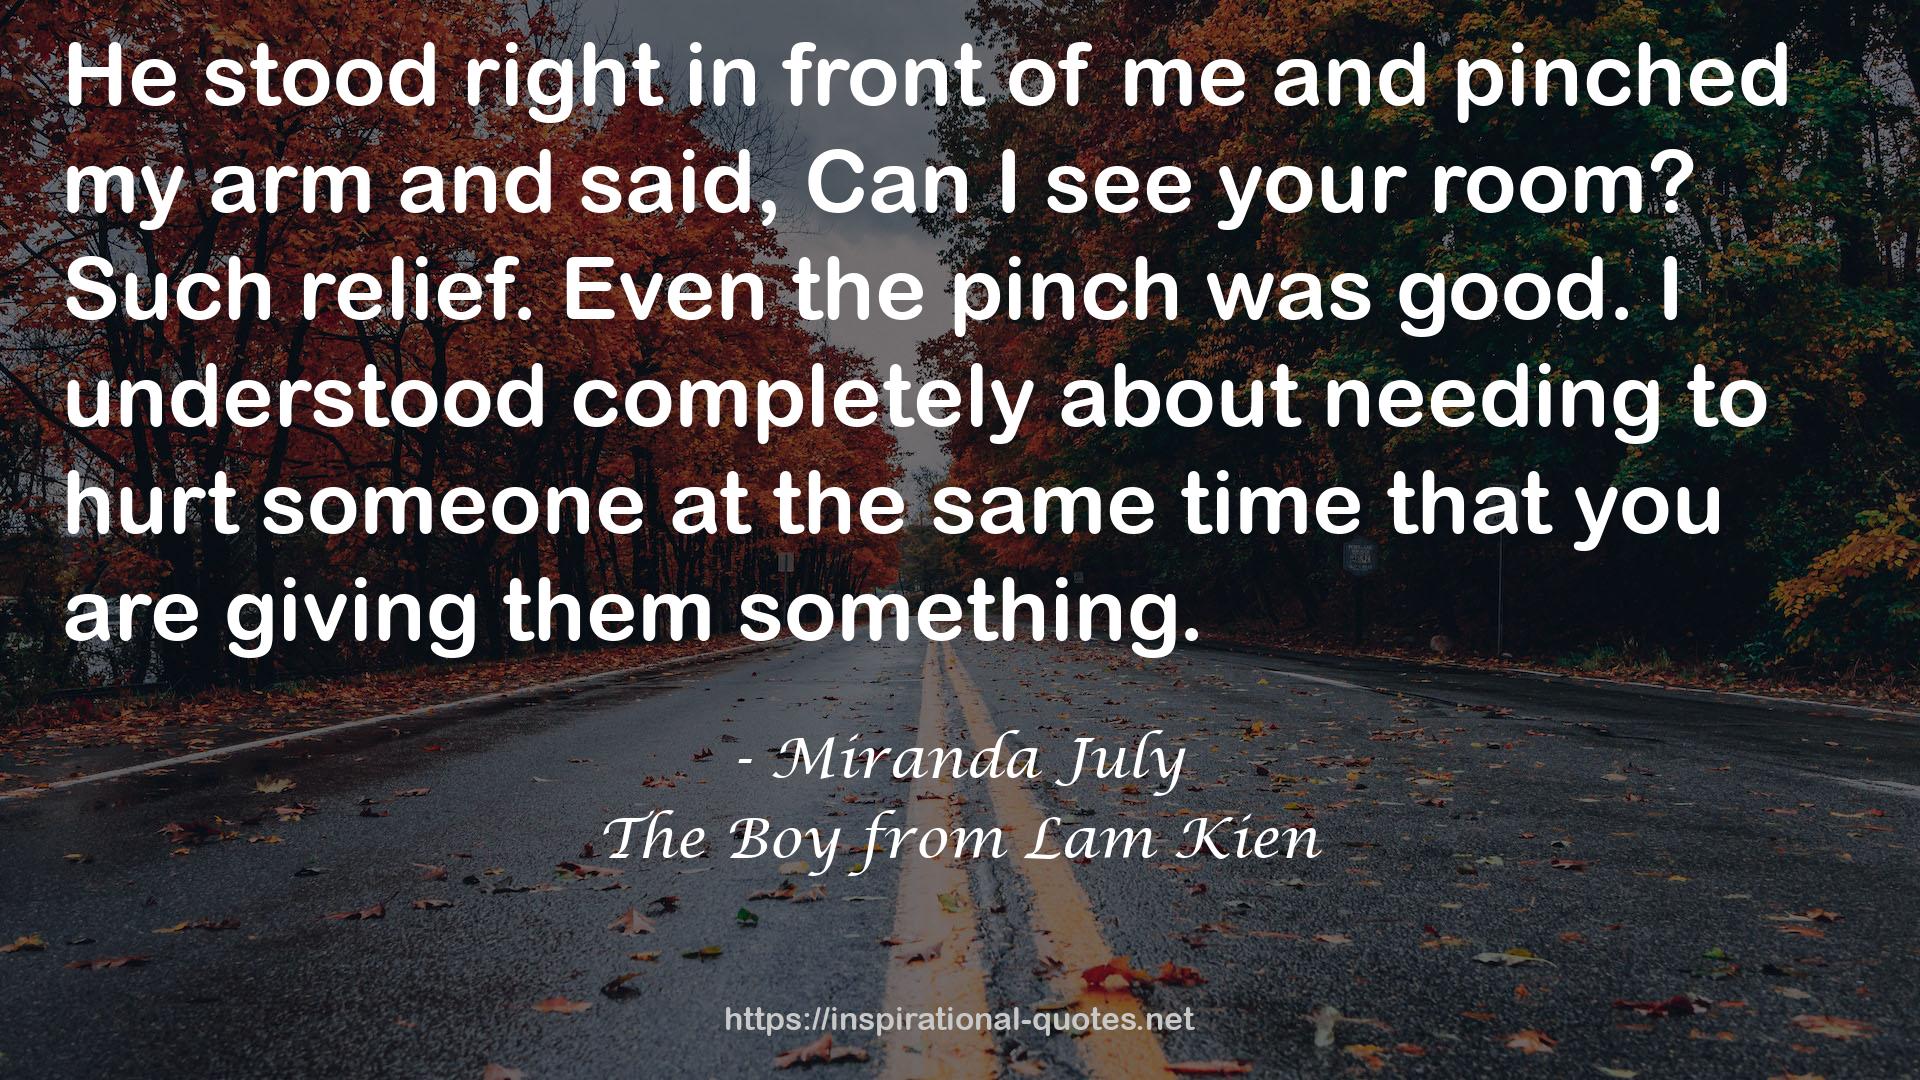 The Boy from Lam Kien QUOTES